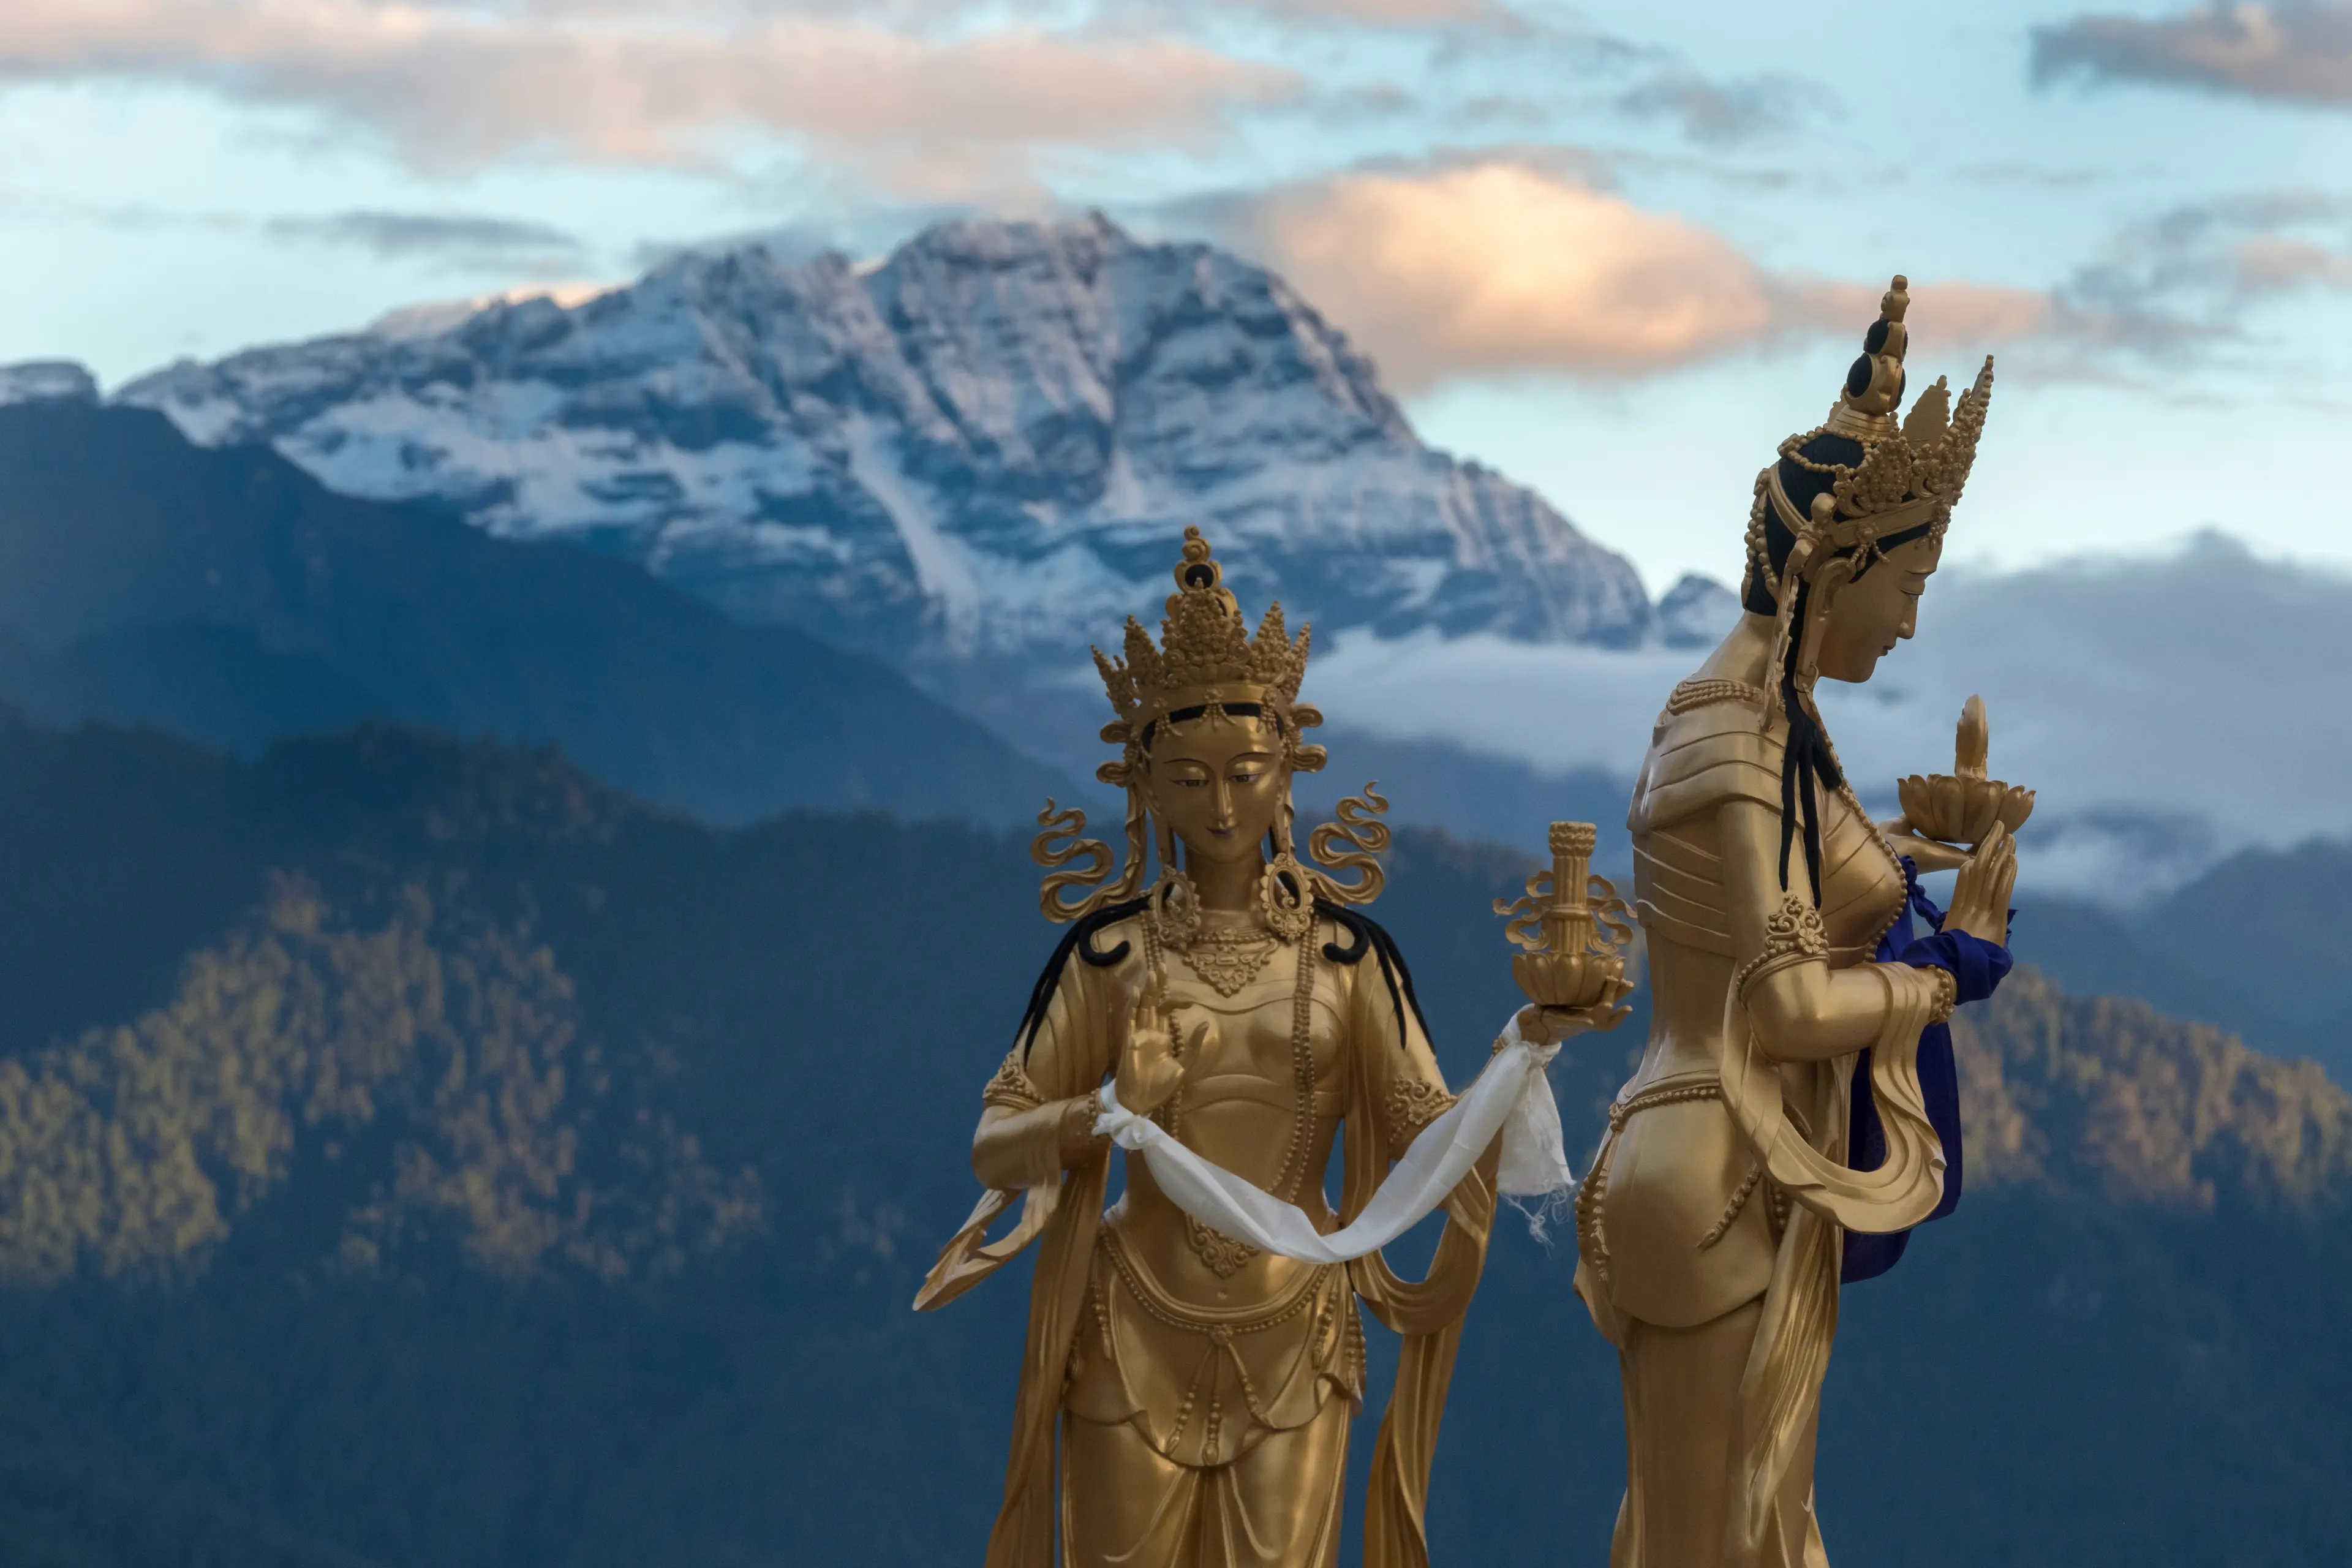 Statues of goddesses with Himalayan peaks in the background